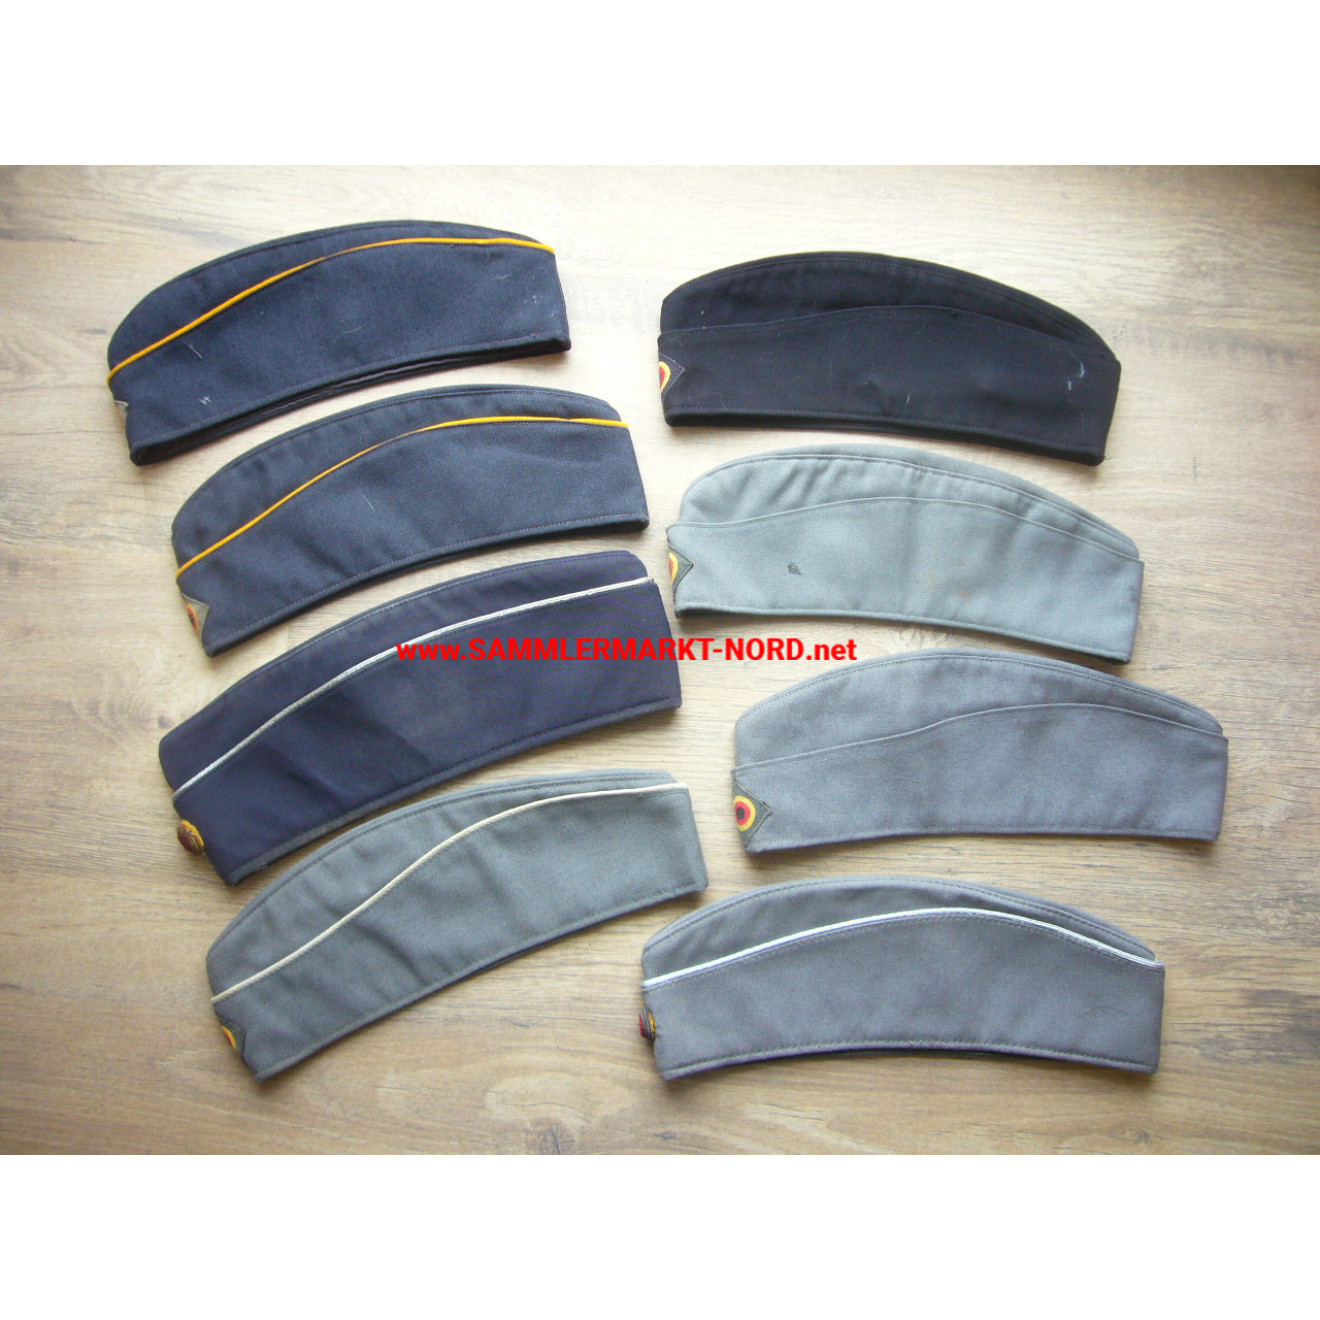 8 x Cap for soldiers & Officer - German Navy, Army & Air Force